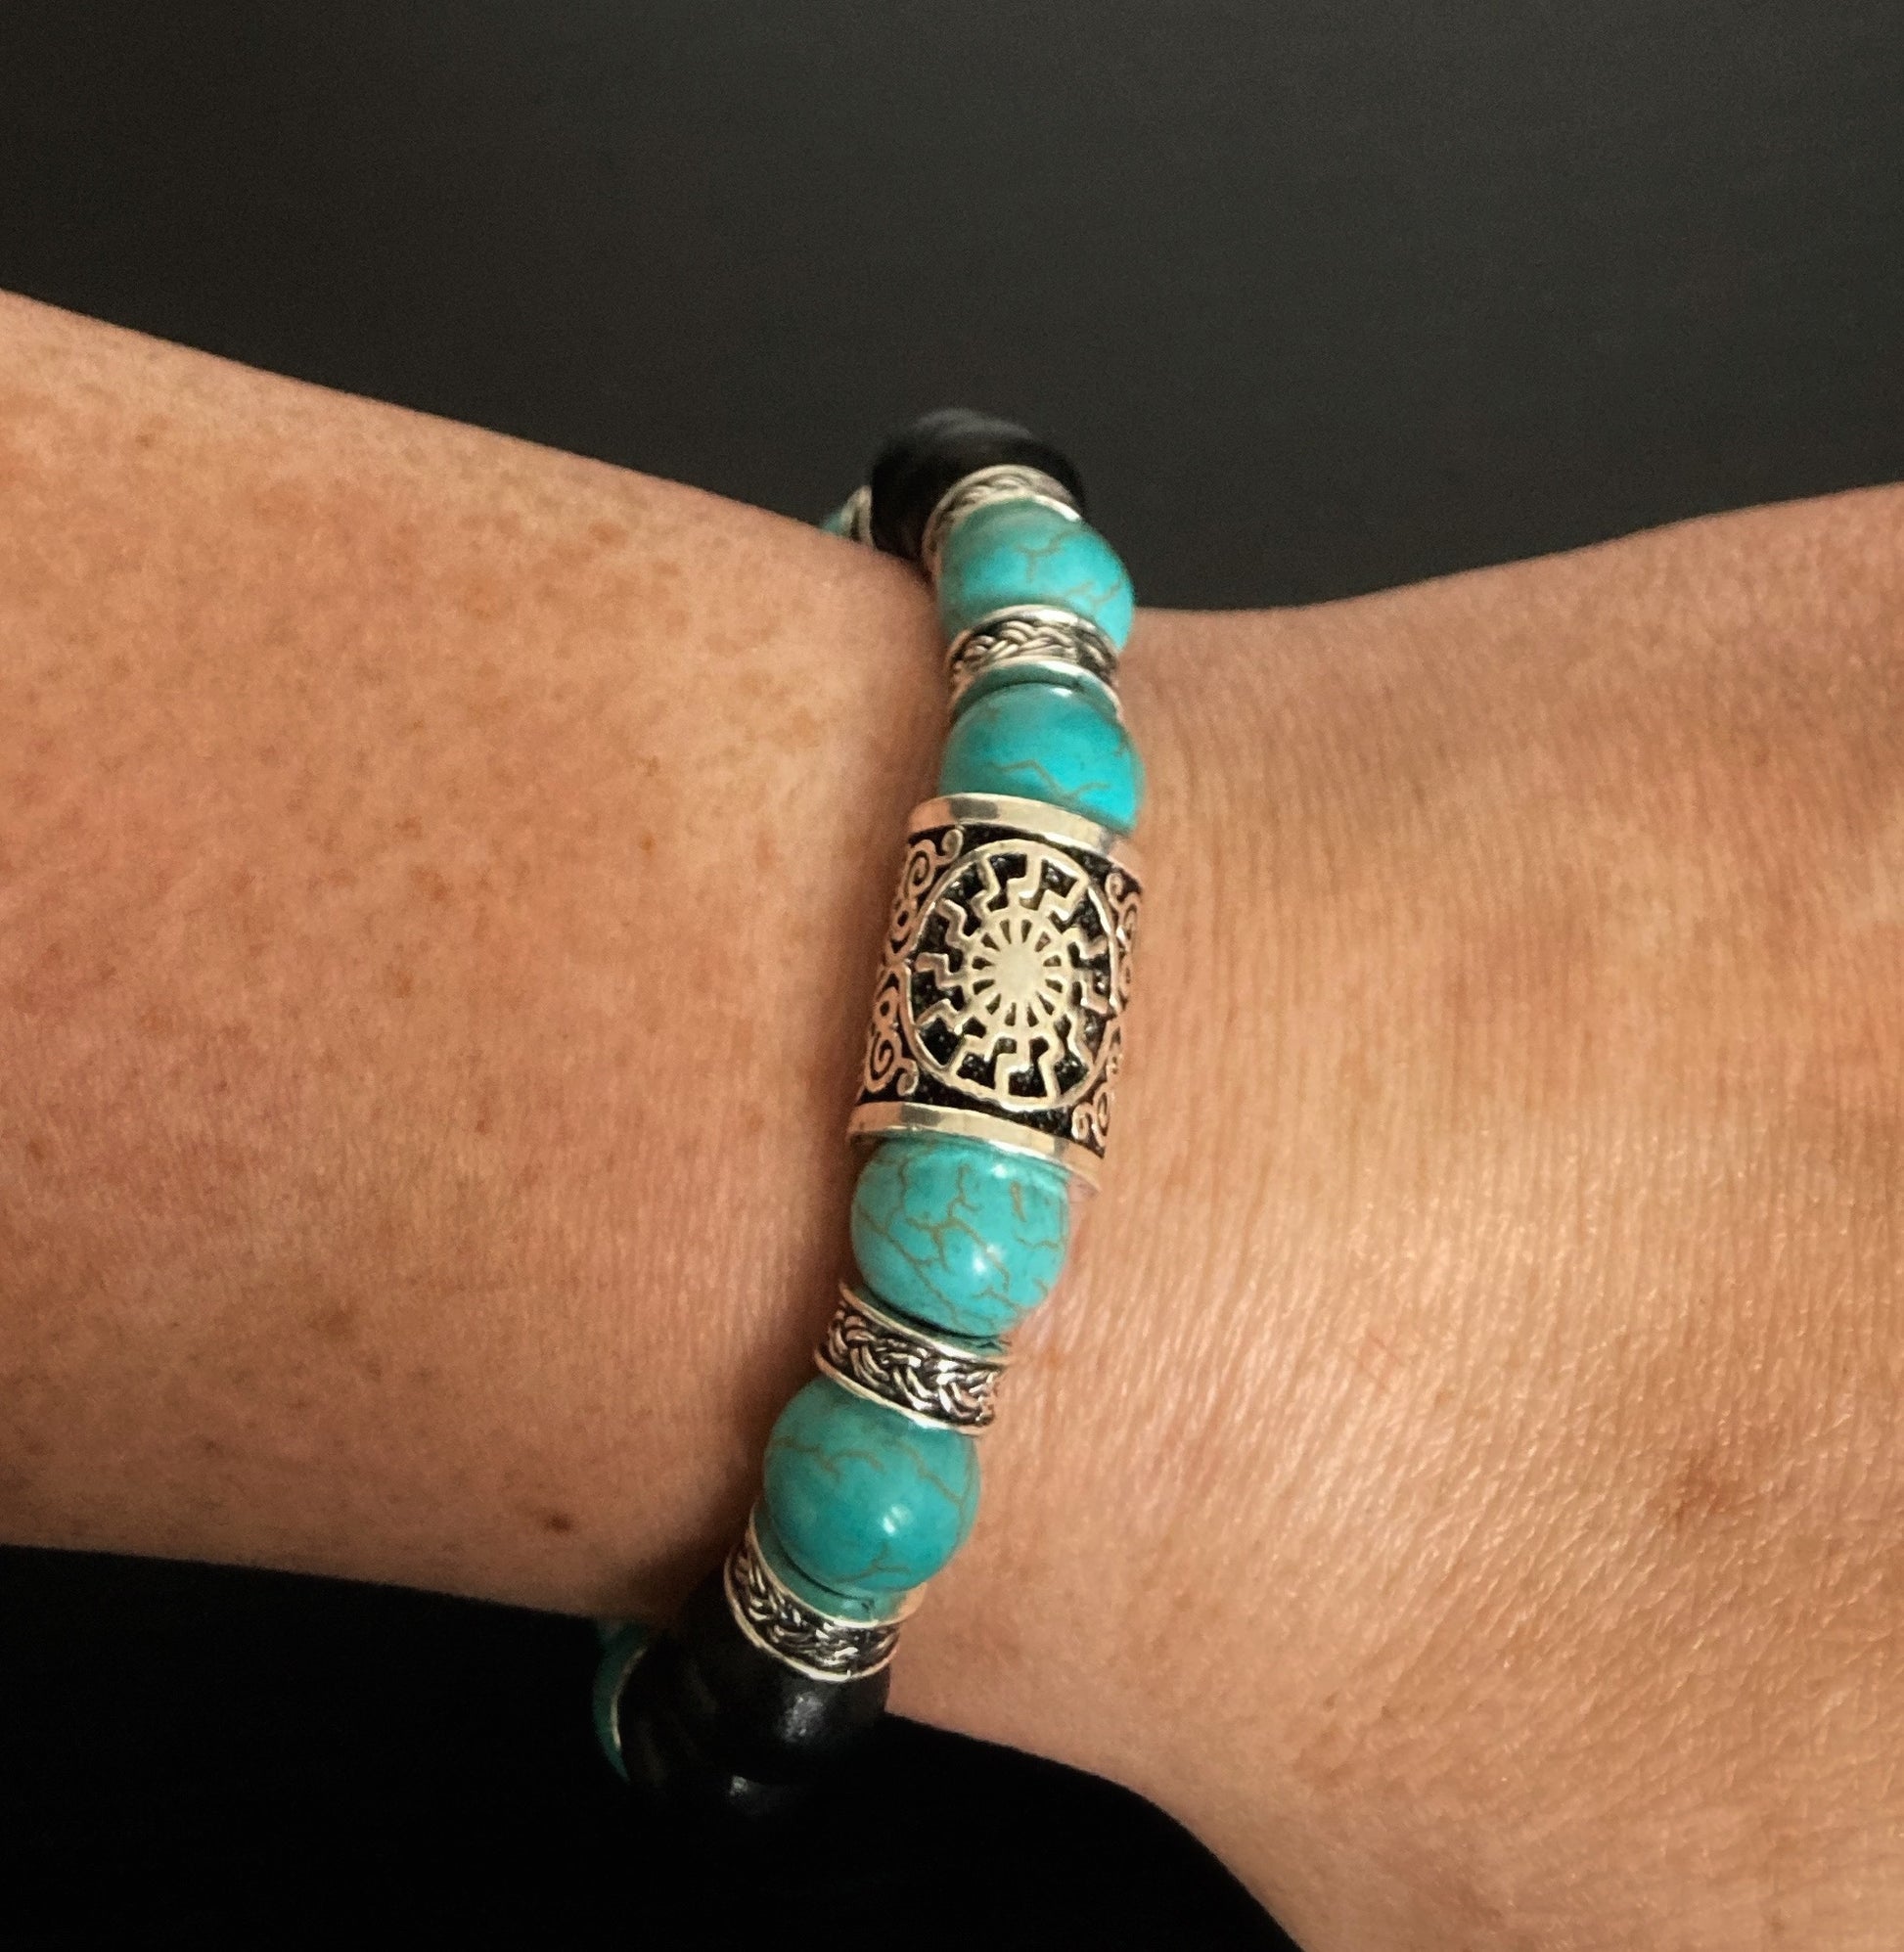 Sitting on a wrist is a beaded bracelet. You can see the main part which is a silver coloured metal rune with markings. Either side of that are turquiose wooden beads with a crackling pattern running through them. Between these beads are small metal ring shapes with patterning.